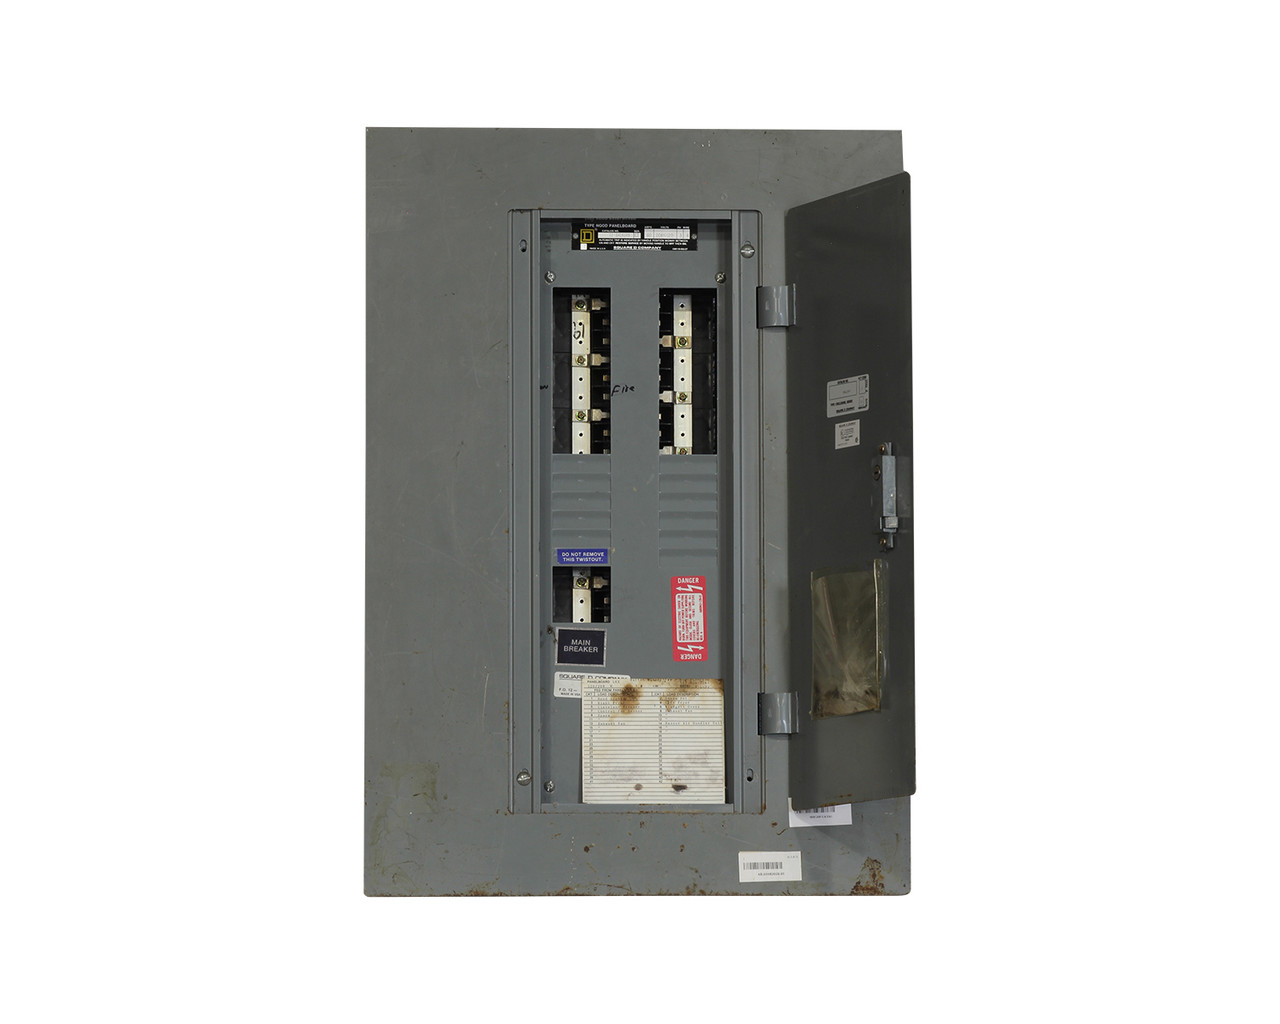 Square D NQOD 12-3414149 Main Breaker Panelboard 60A 208Y/120V NEMA: 1 D: 6 H: 31 W: 22 Number of Spaces: 30 3 PH, 4 Wires, Cover MHC29F, Enclosure MH29